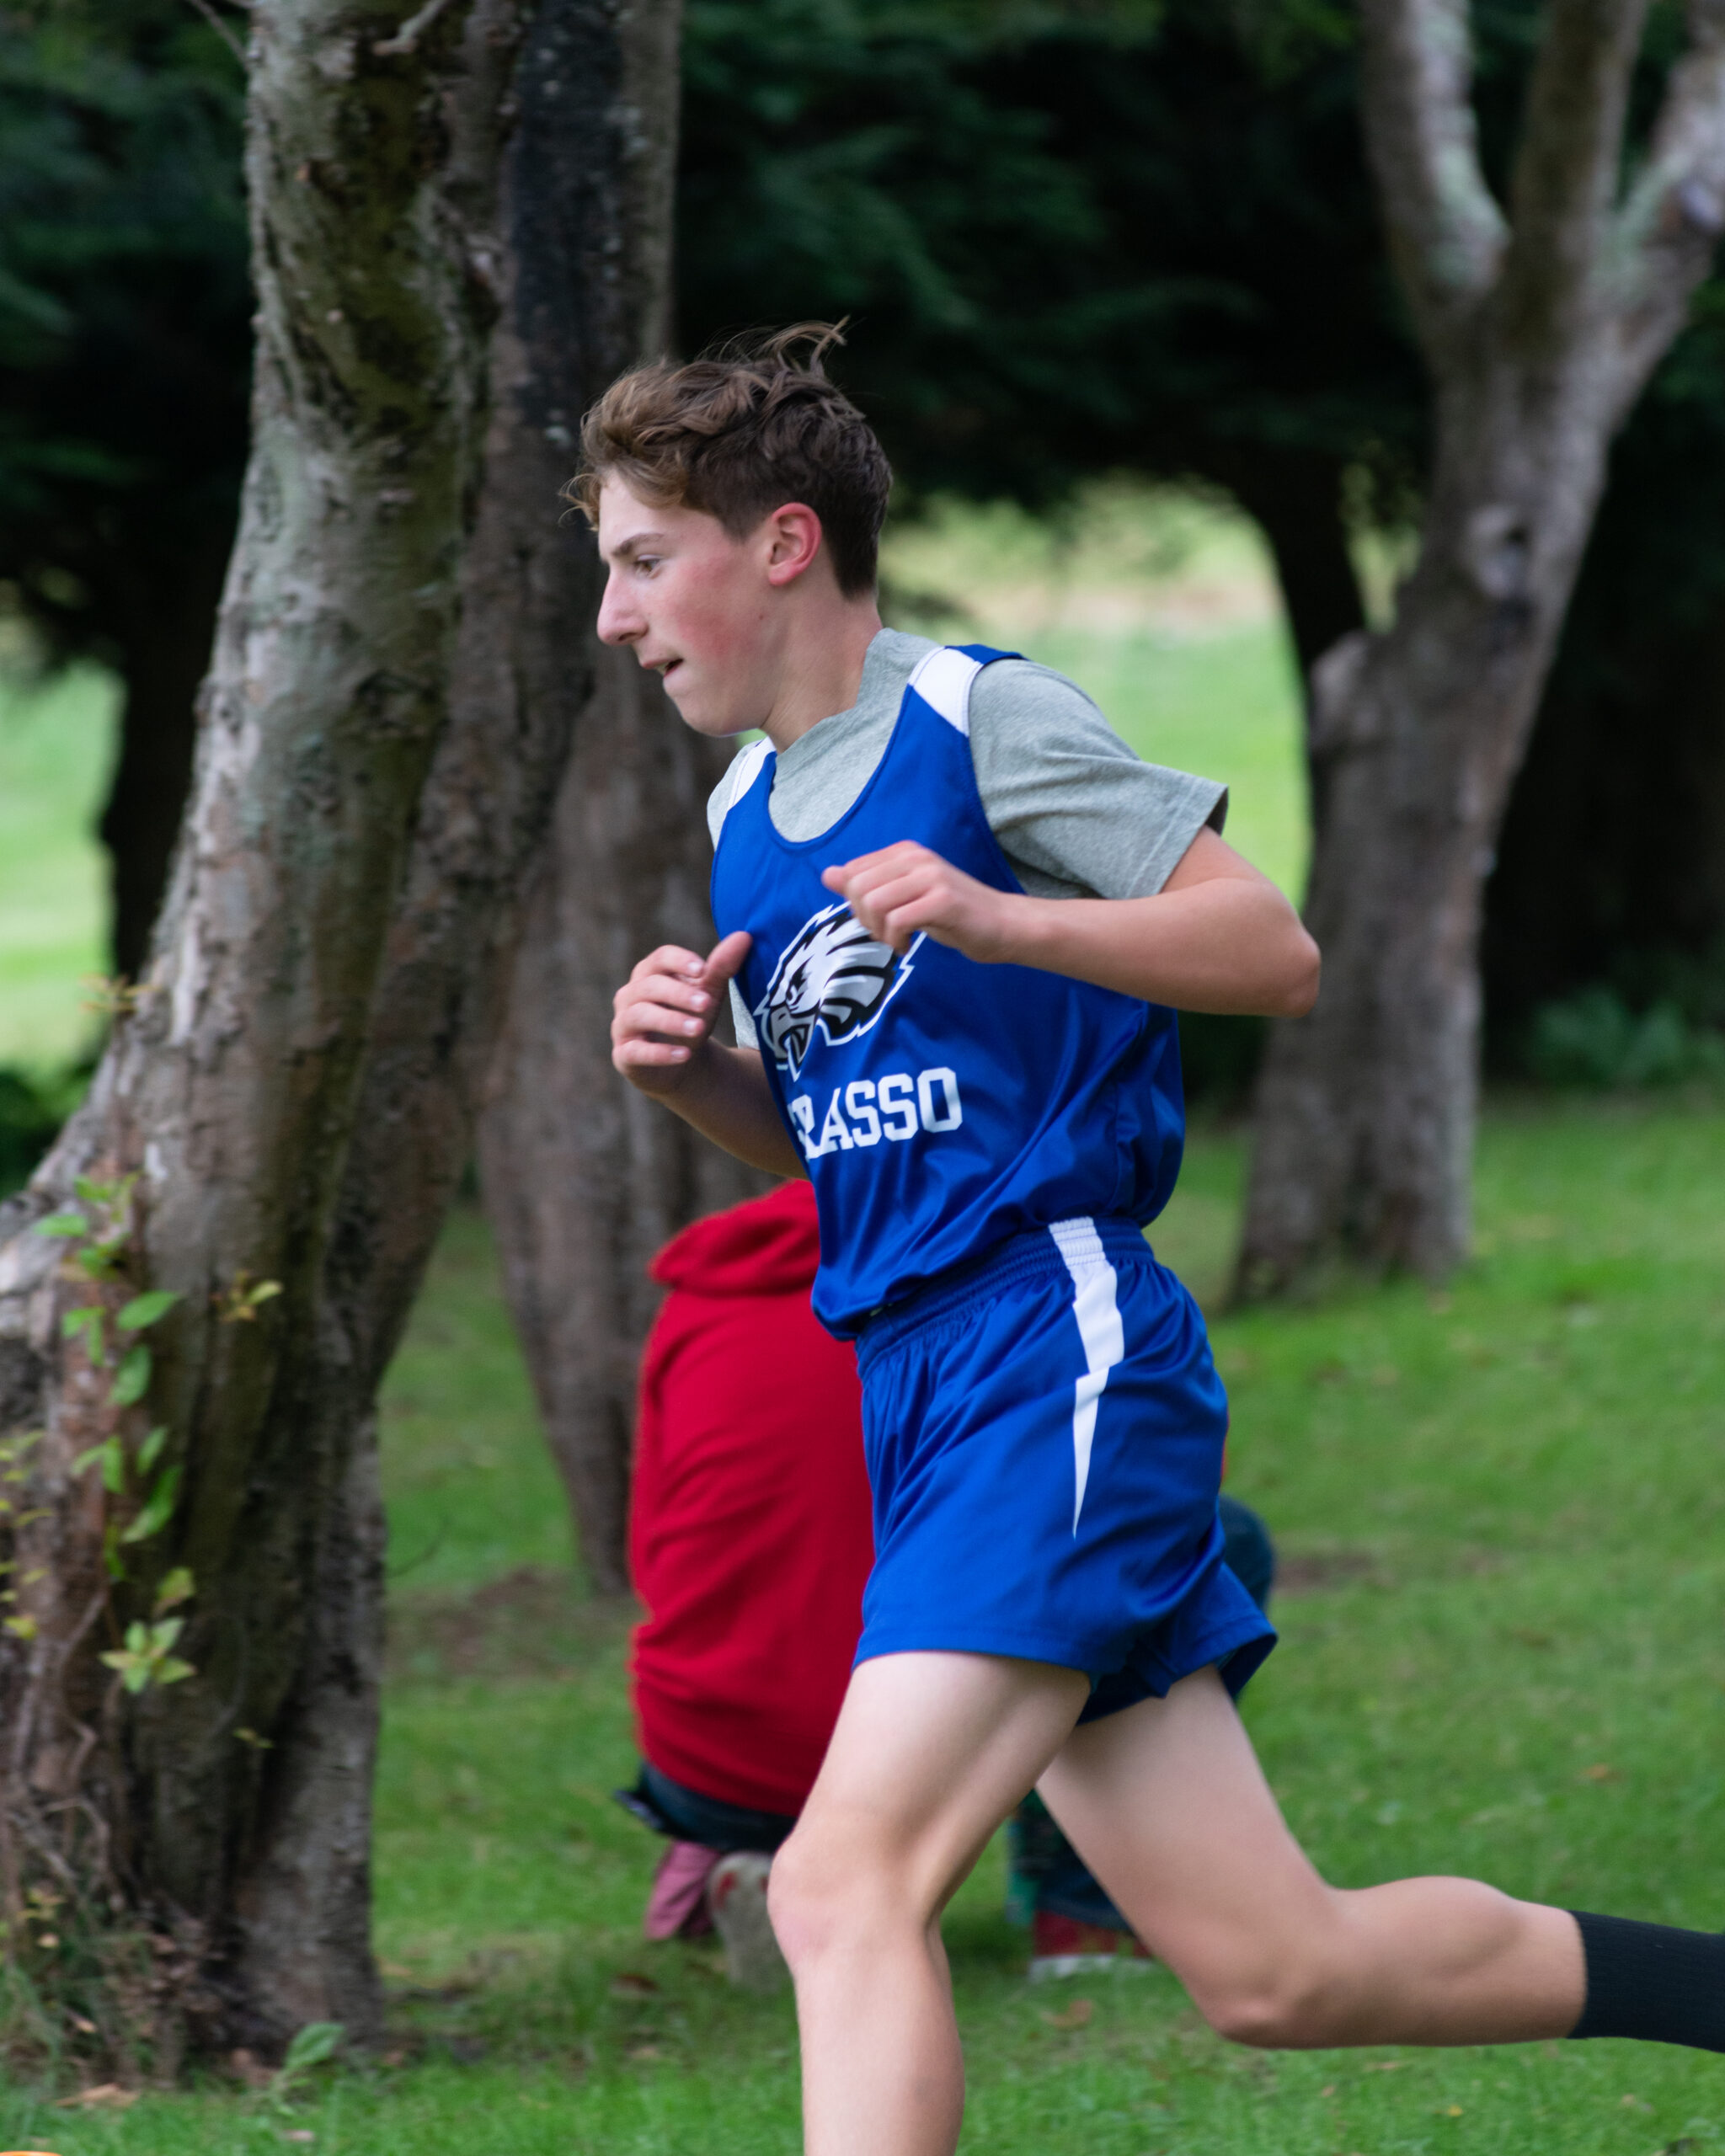 Action shot of a runner taking part in a Grasso Tech boys' Cross Country meet.